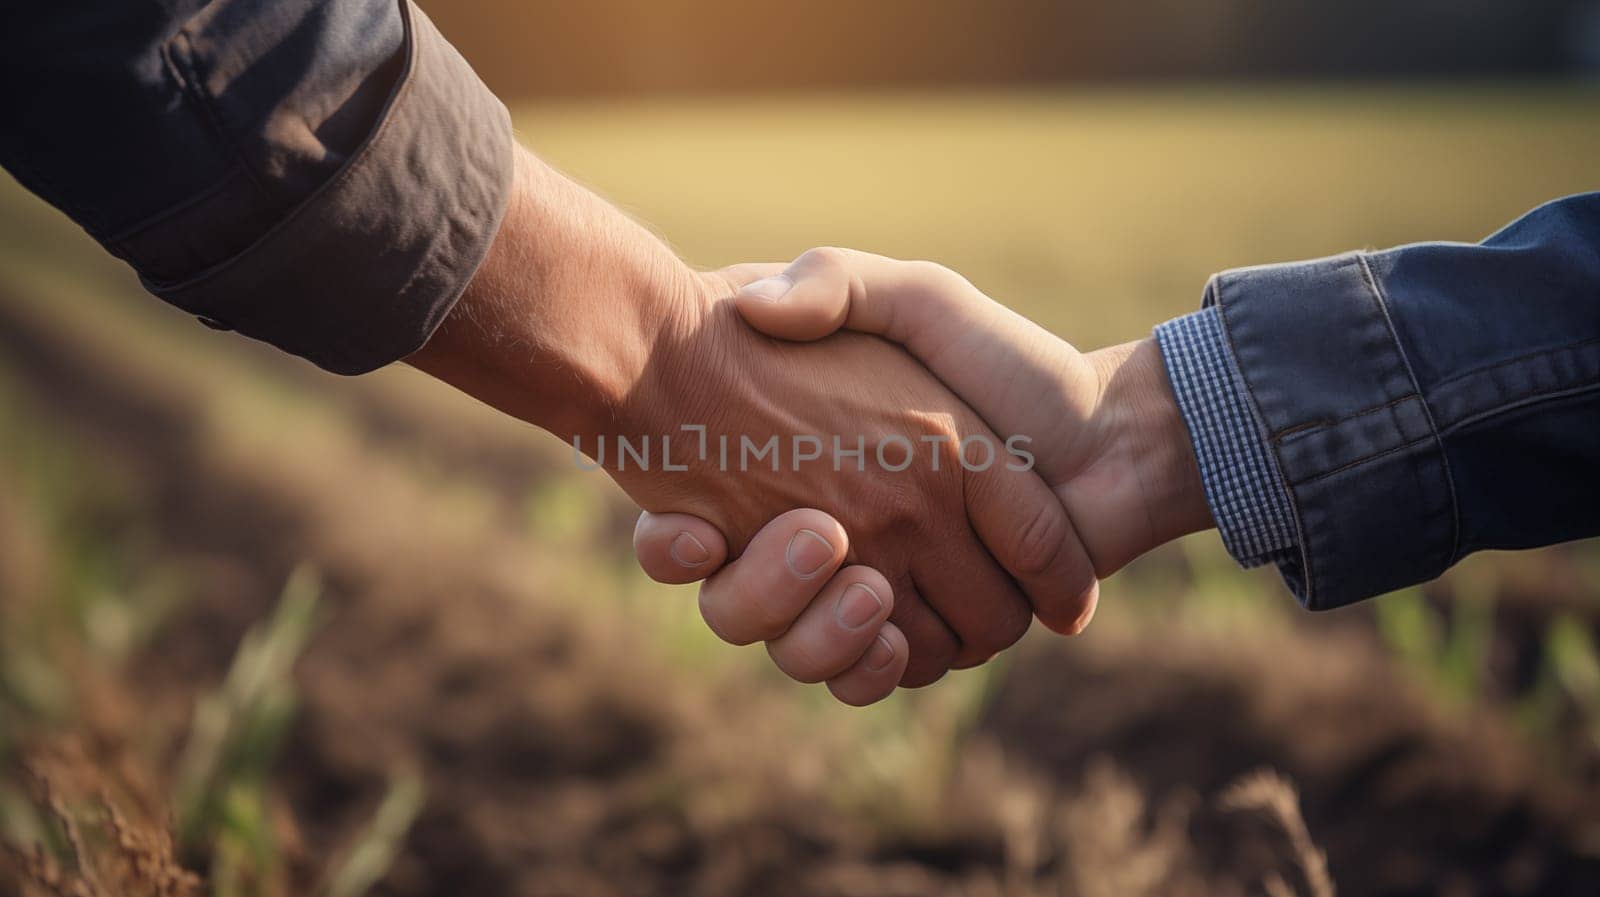 Handshake of two farmers men in shirts, on the background of a farmer's field.